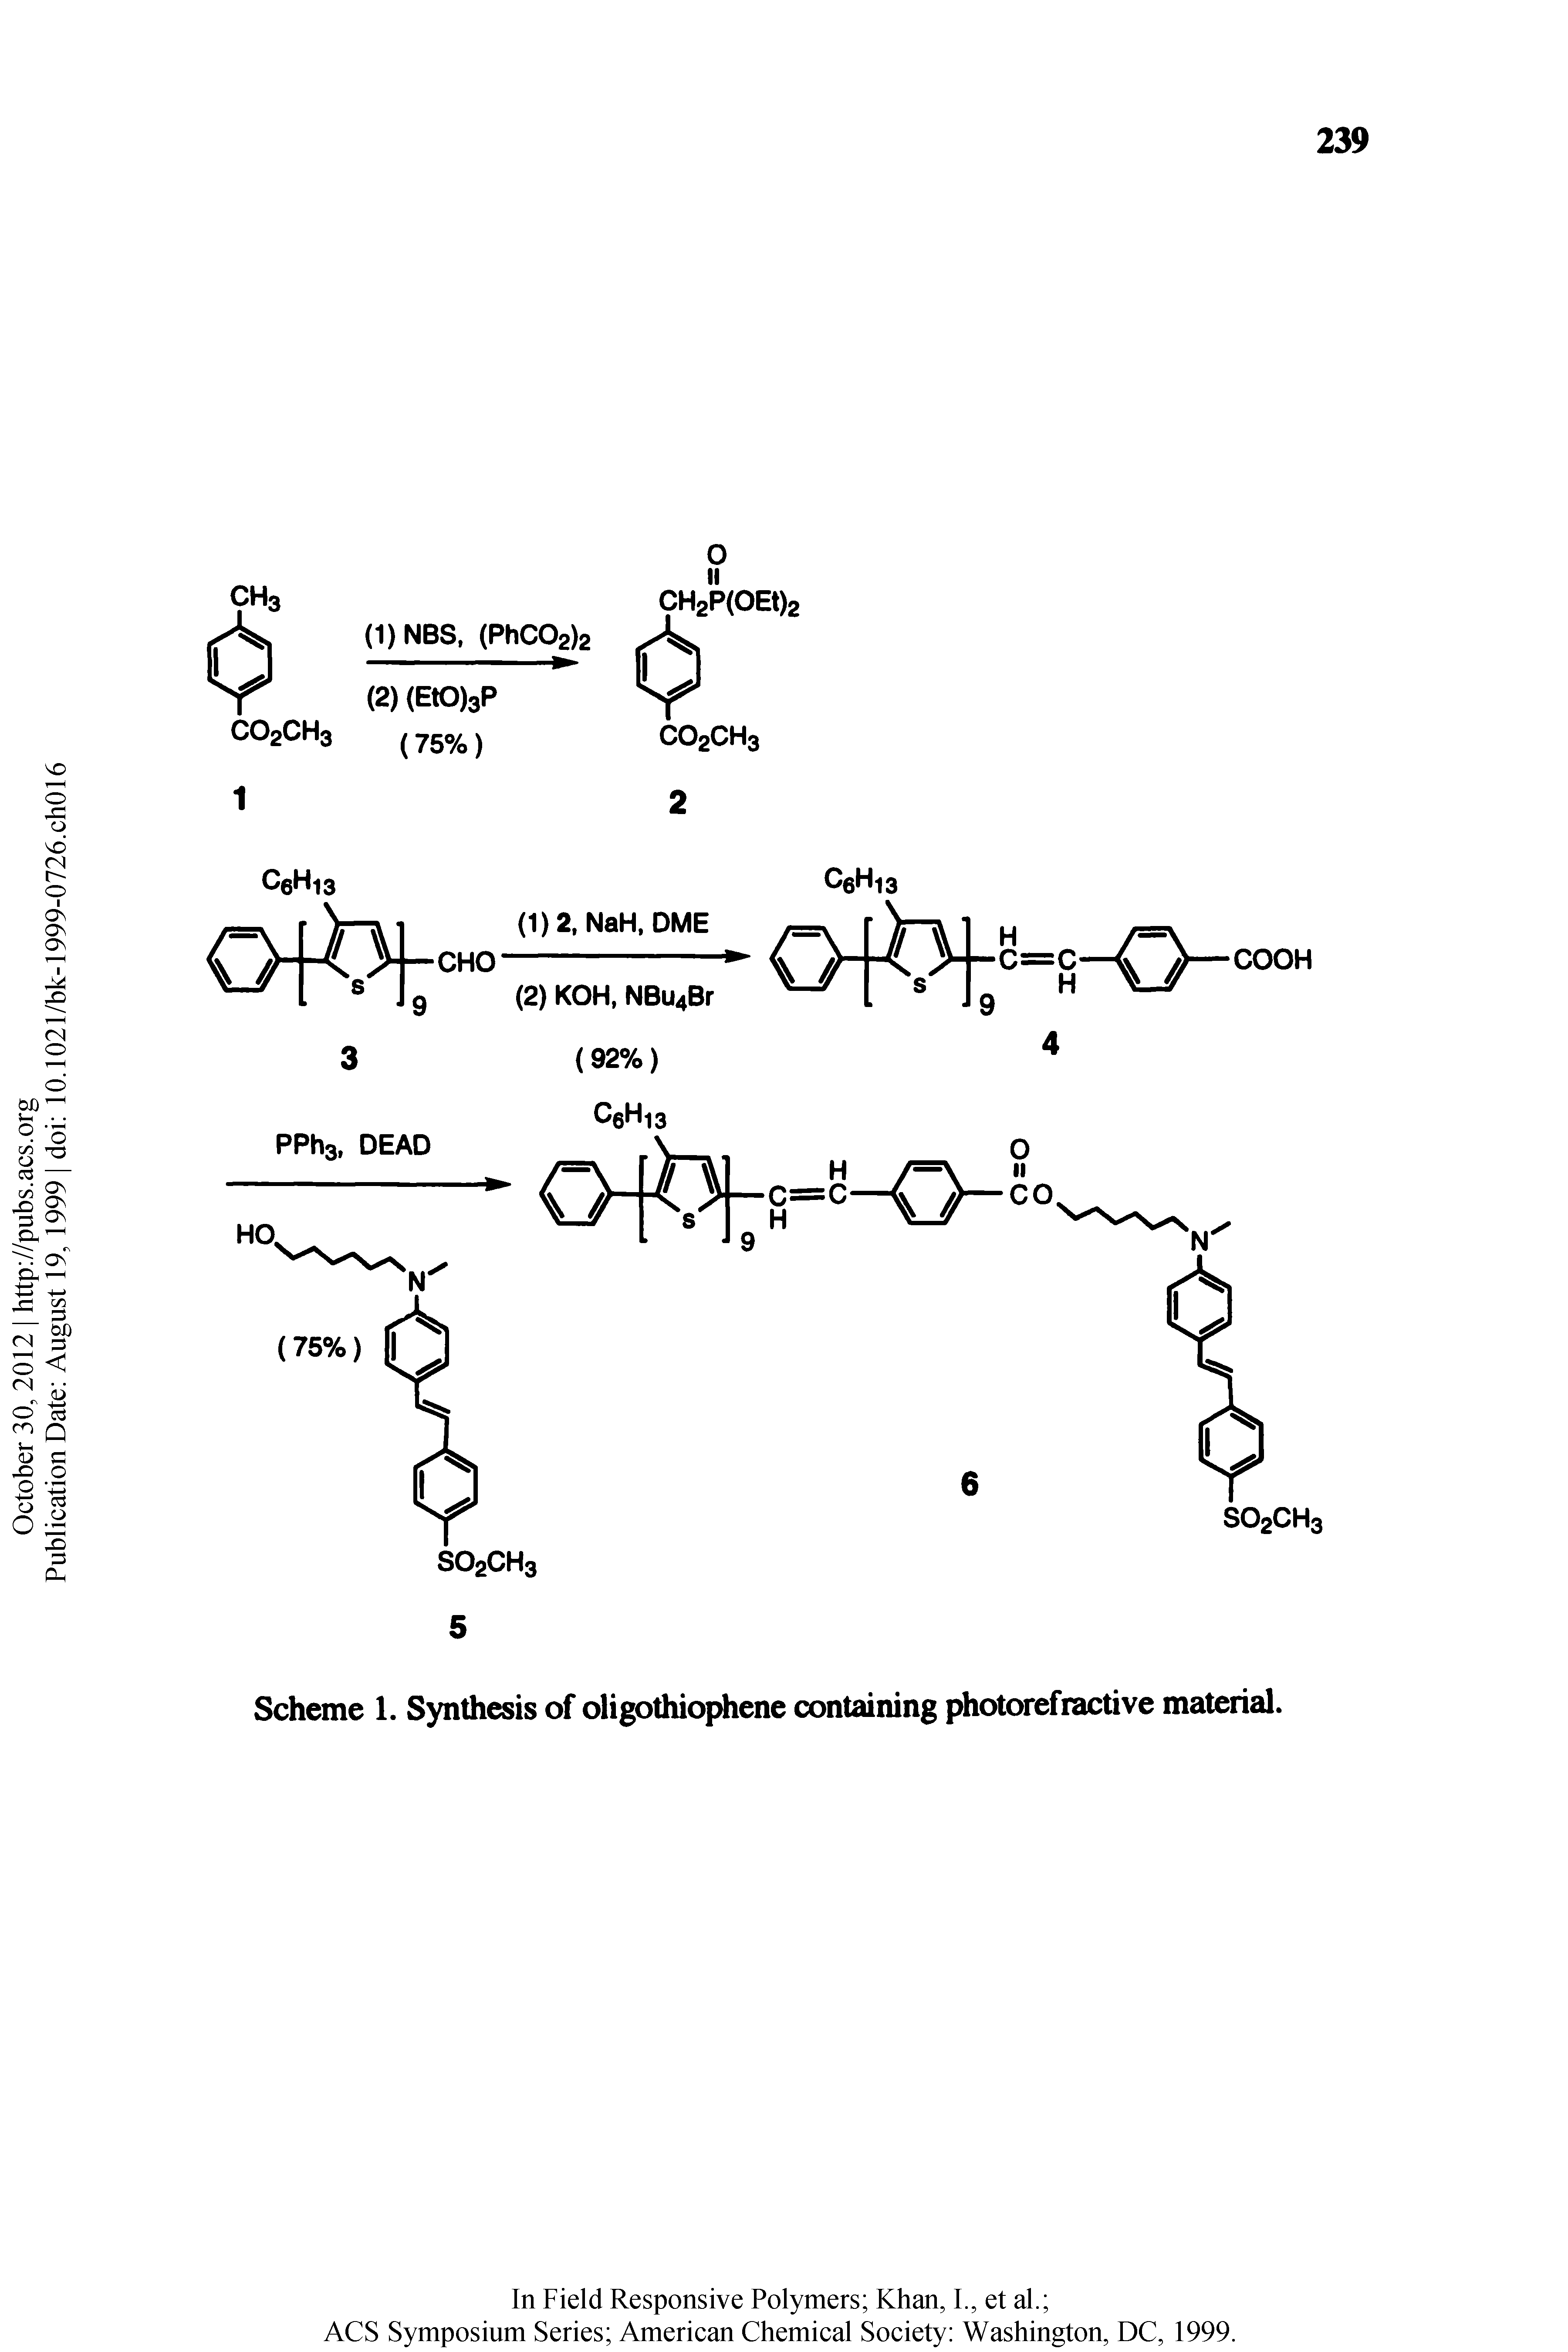 Scheme 1. Synthesis of oligothiophene containing photorefractive material.